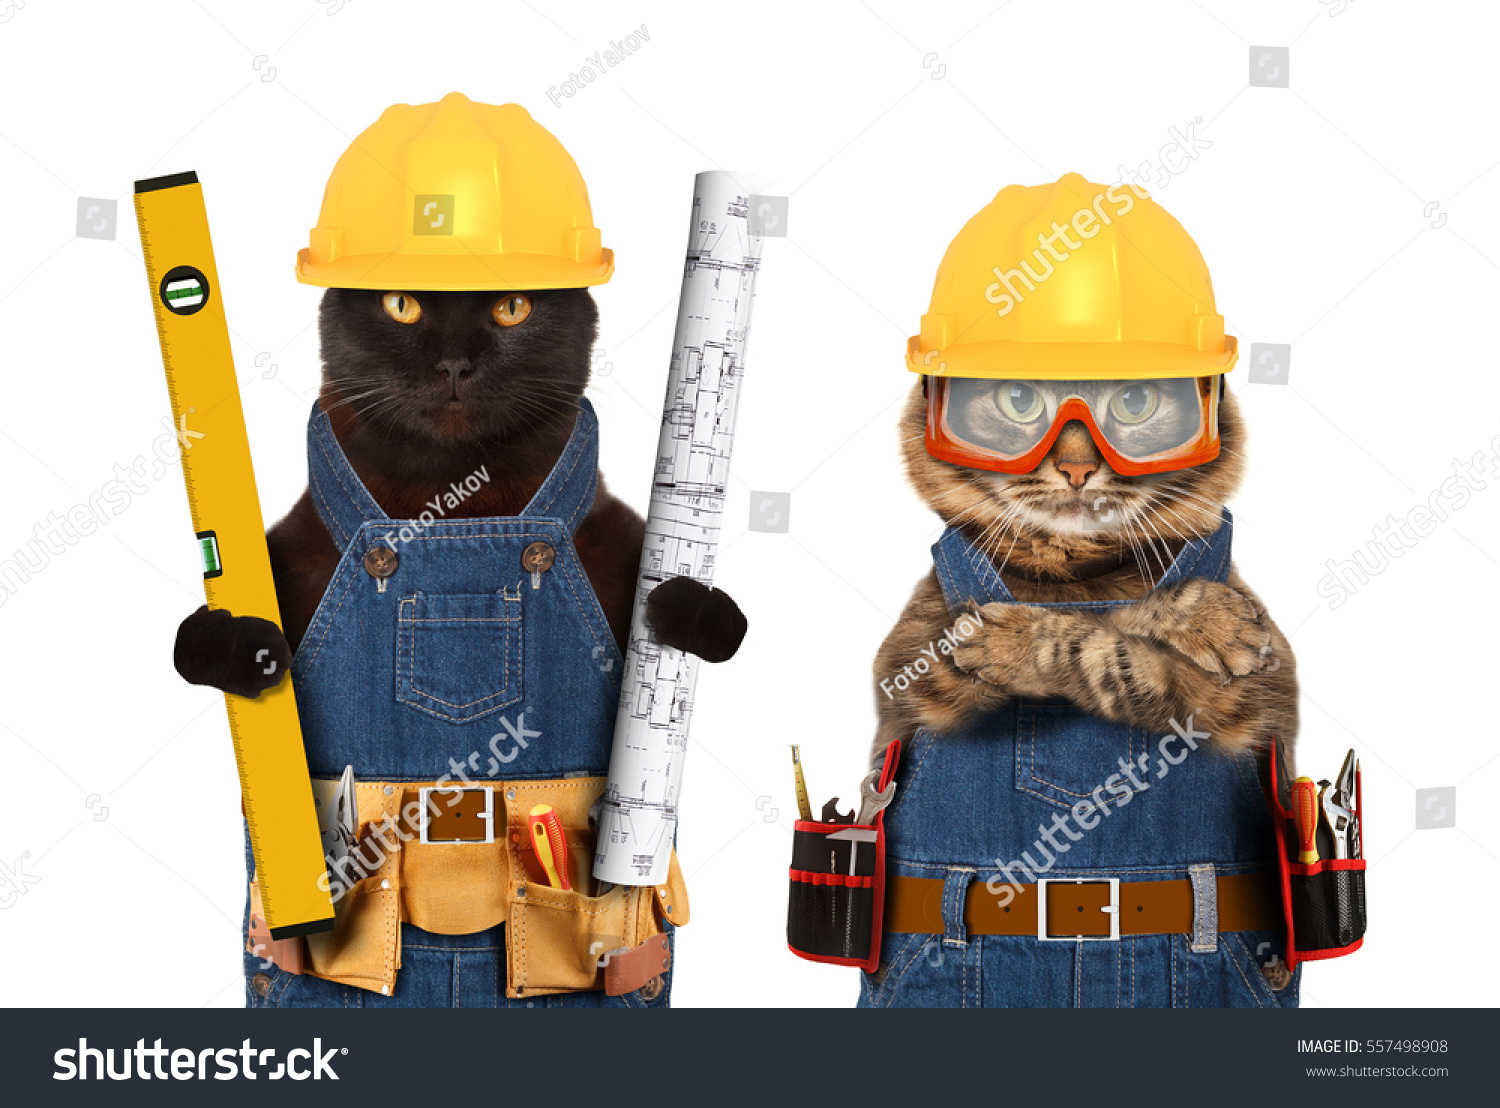 stock-photo-funny-cats-are-wearing-a-suit-of-builder-and-holding-a-builder-s-level-and-project-plan-craftsman-557498908.jpg